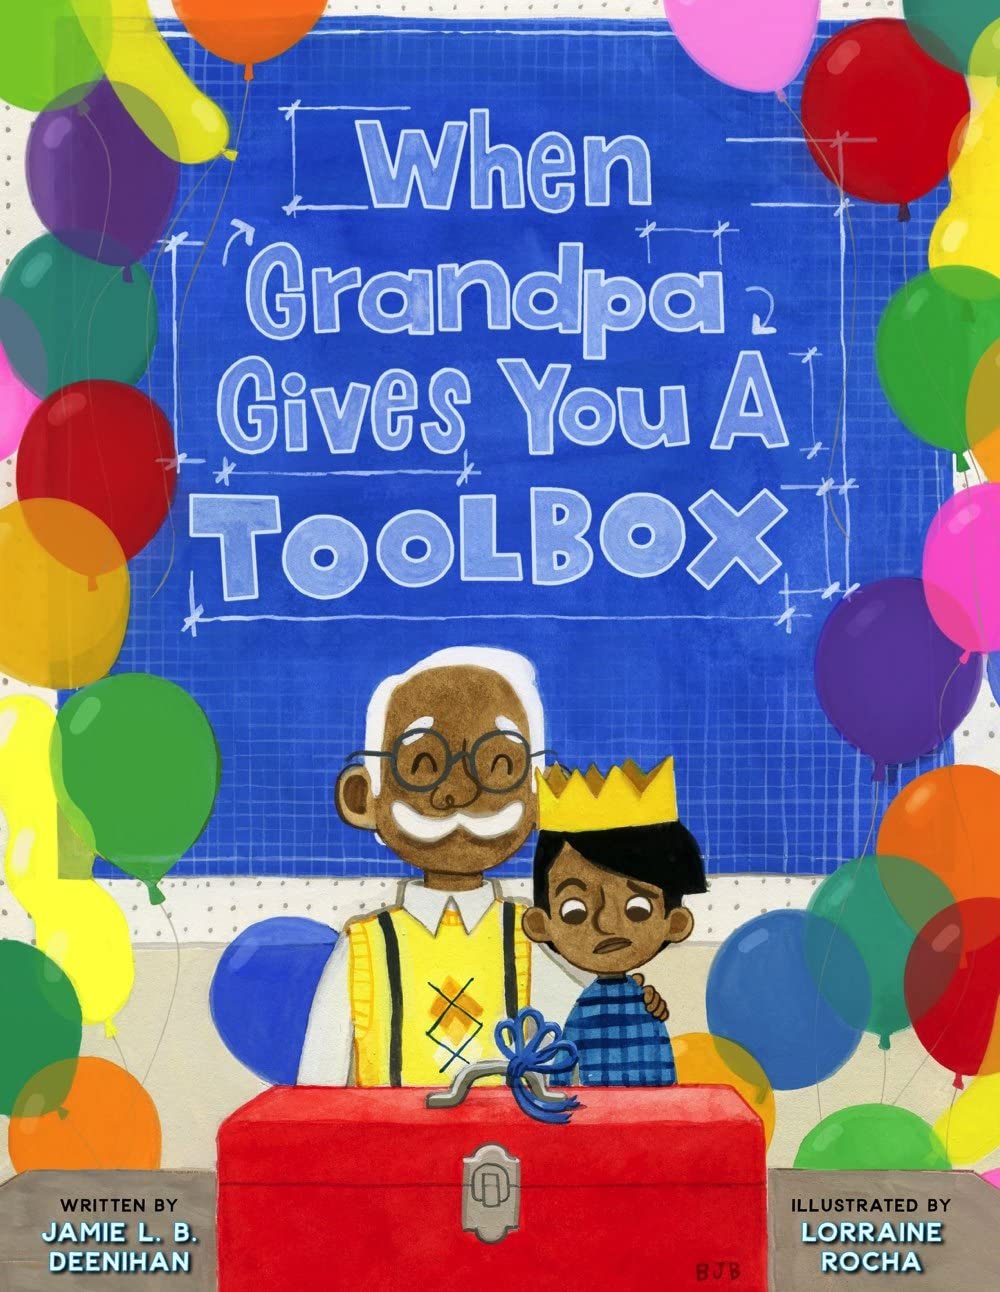 The cover of the picture book "When Grandpa Gives You a Toolbox" features a grandfather with his arm around his grandson. They are looking down at a big red toolbox in front of them. The grandfather smiles while the grandson doesn't look so happy. They are surrounded by balloons, and the background looks like a building blueprint.